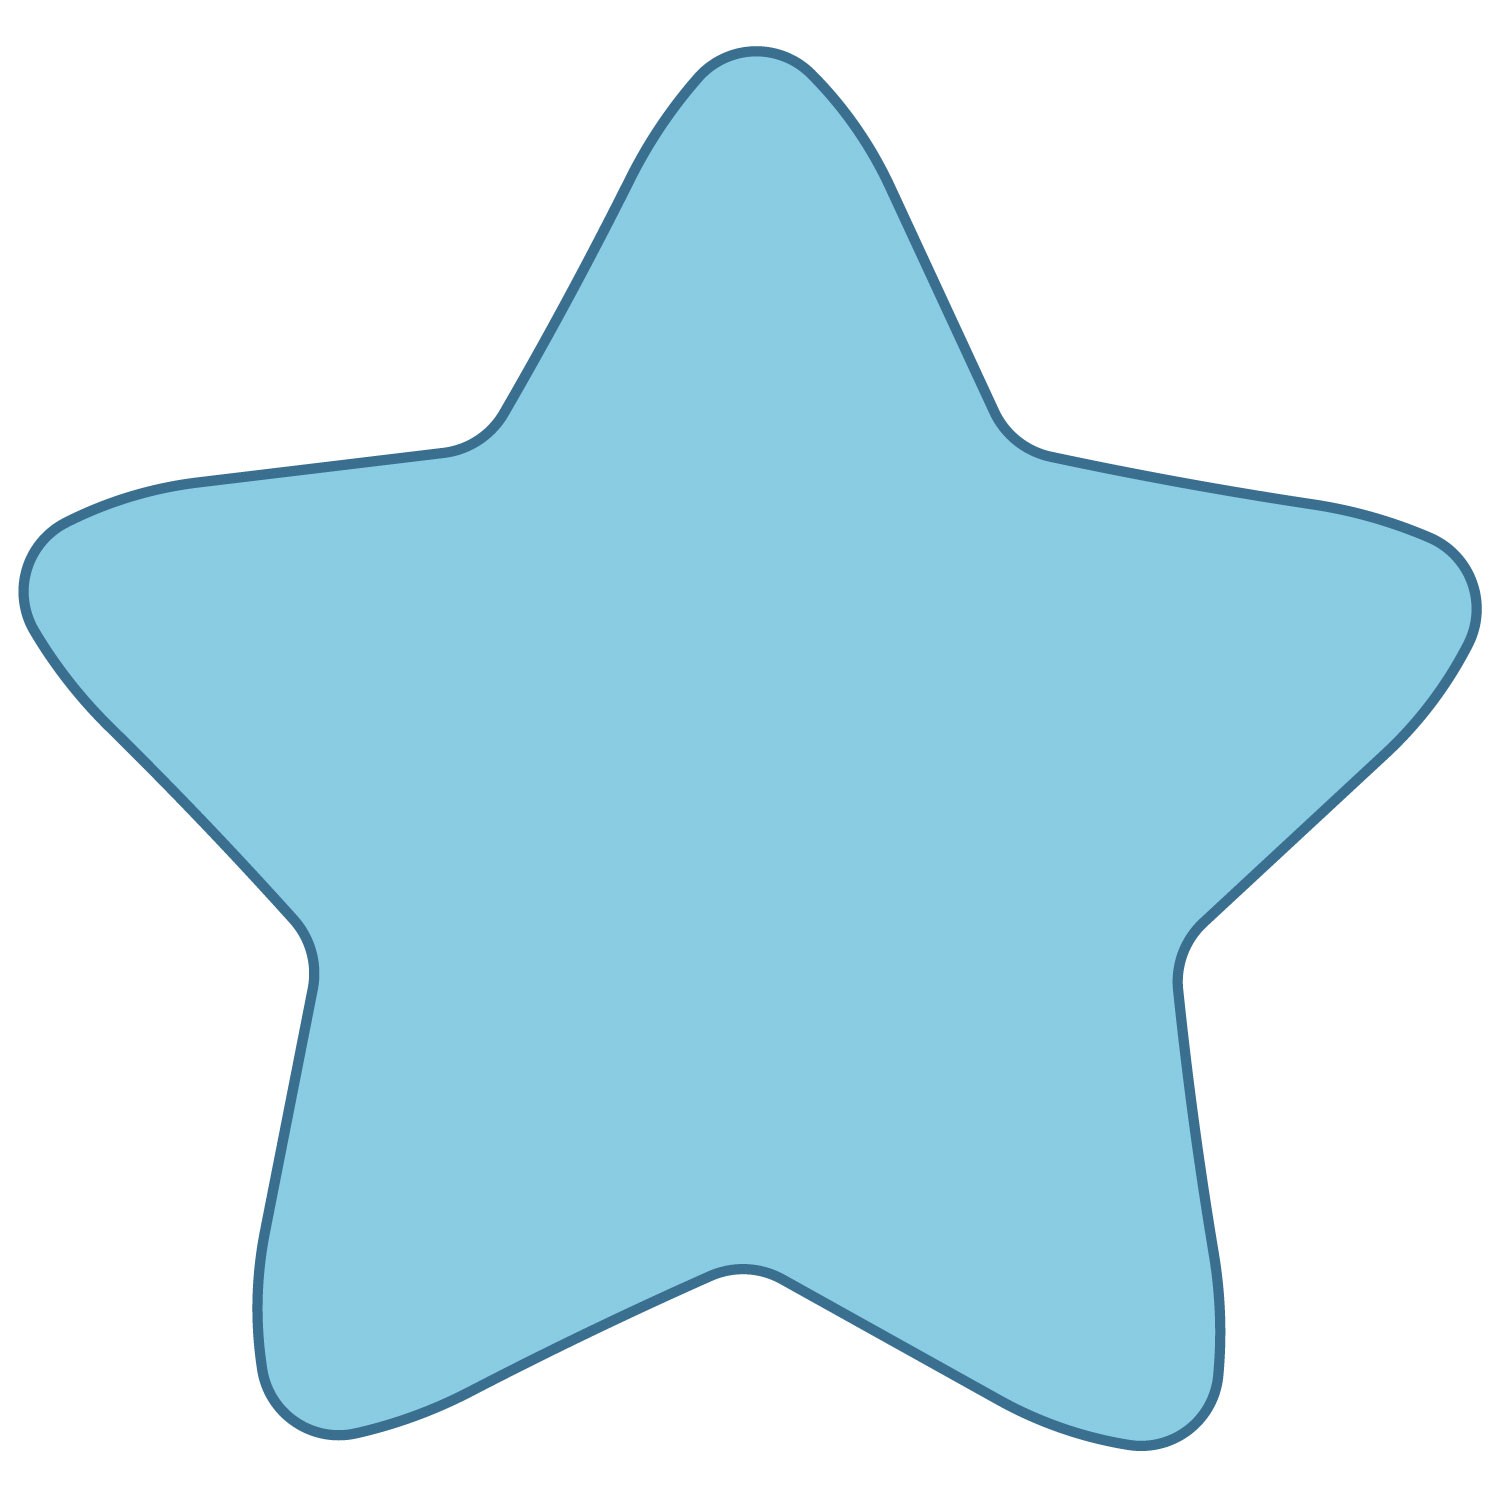 free-star-shape-download-free-star-shape-png-images-free-cliparts-on